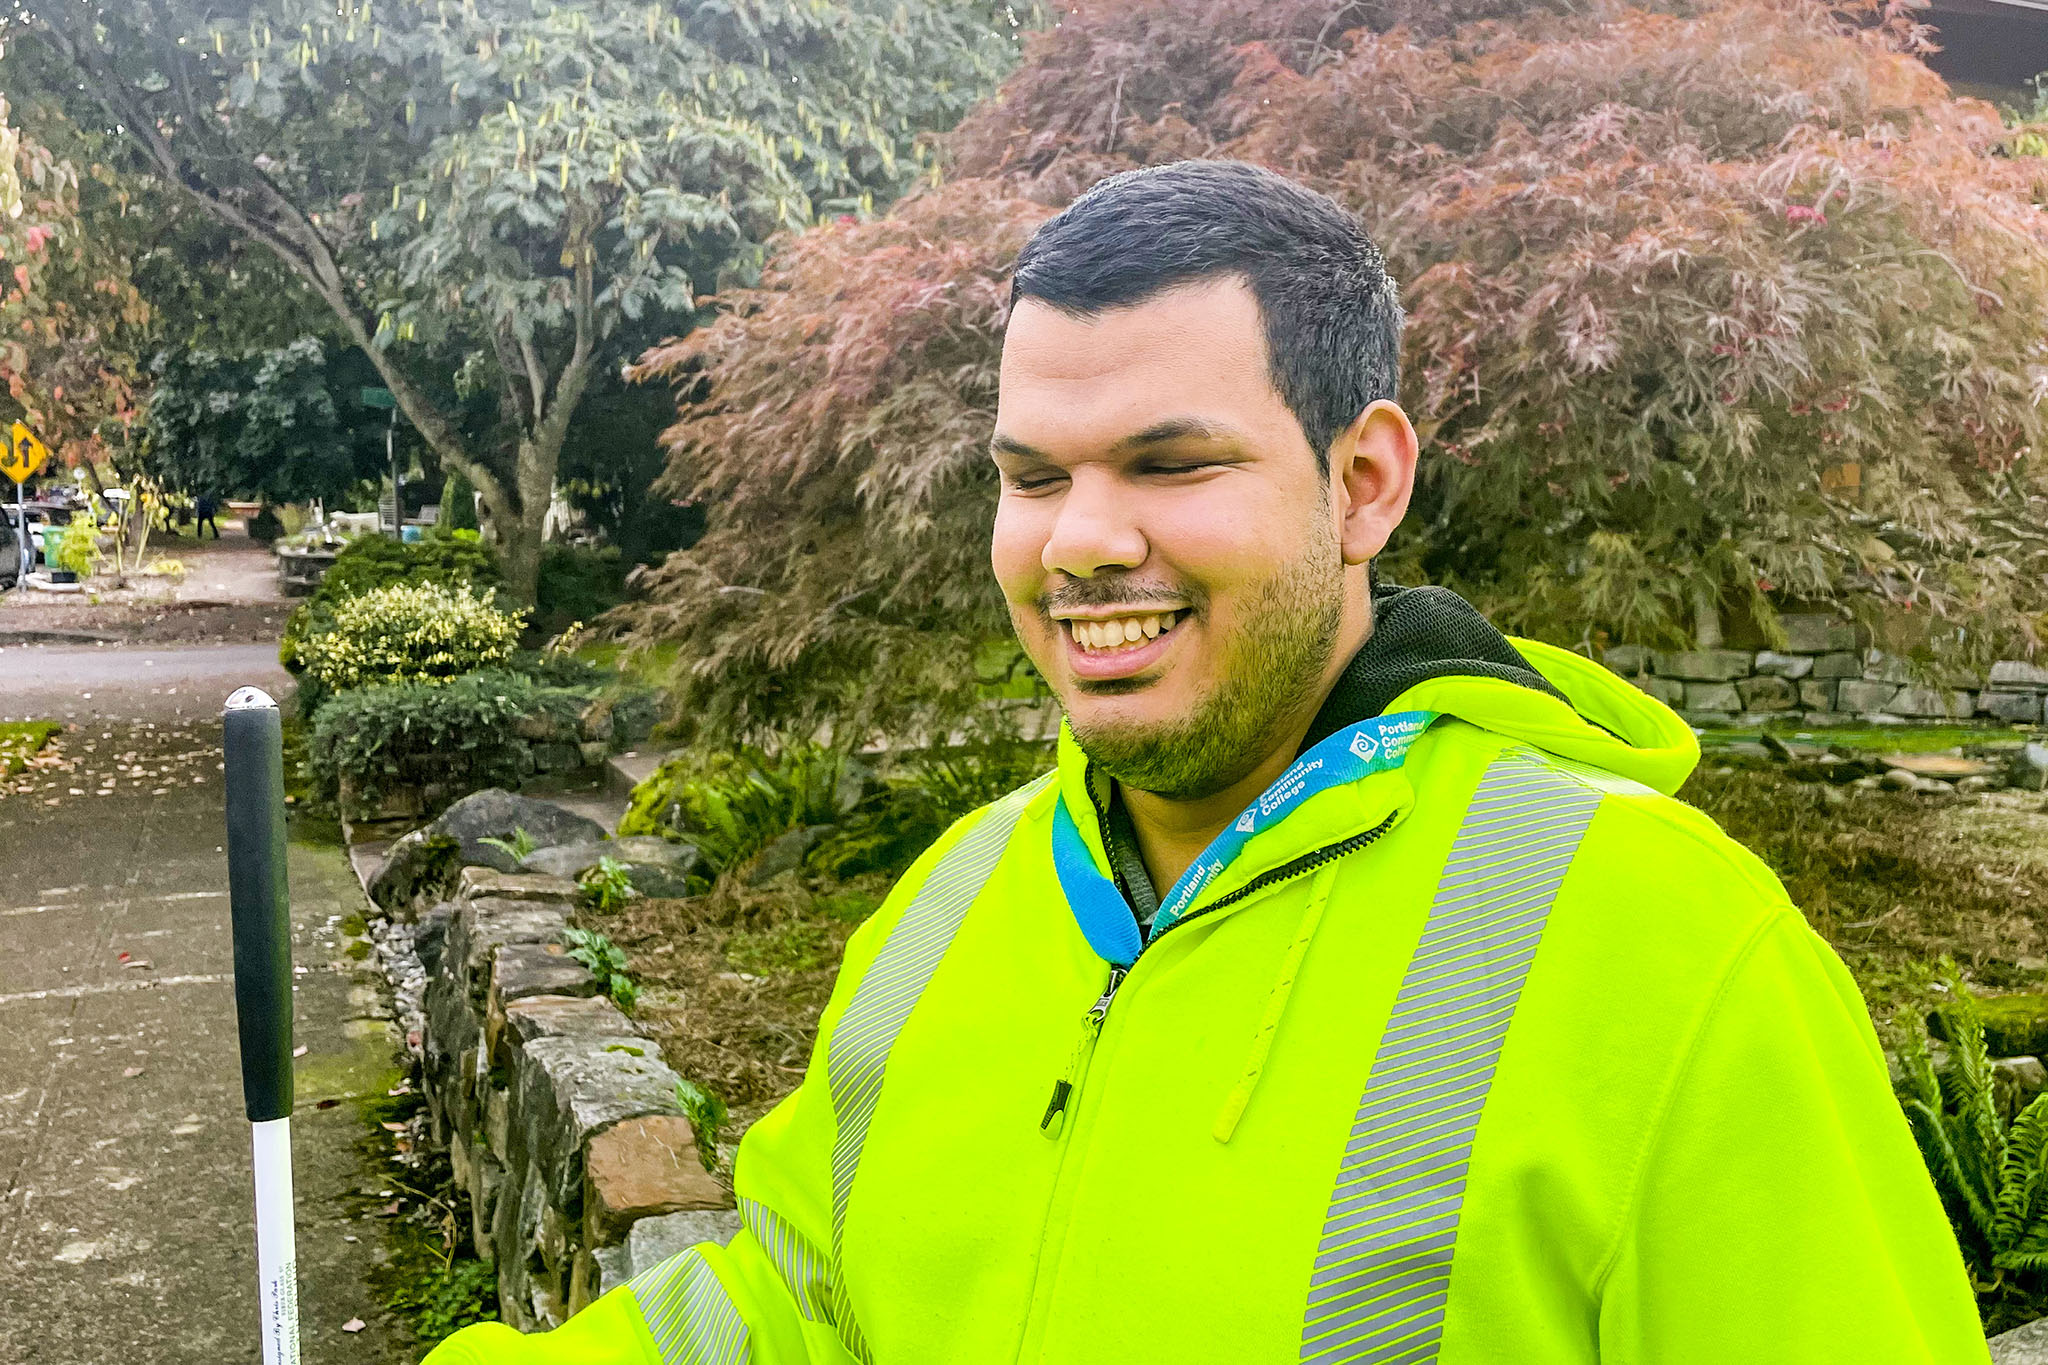 A portrait photo of a smiling latino man from the shoulders up, wearing a reflective jacket outside in front of some bushes.